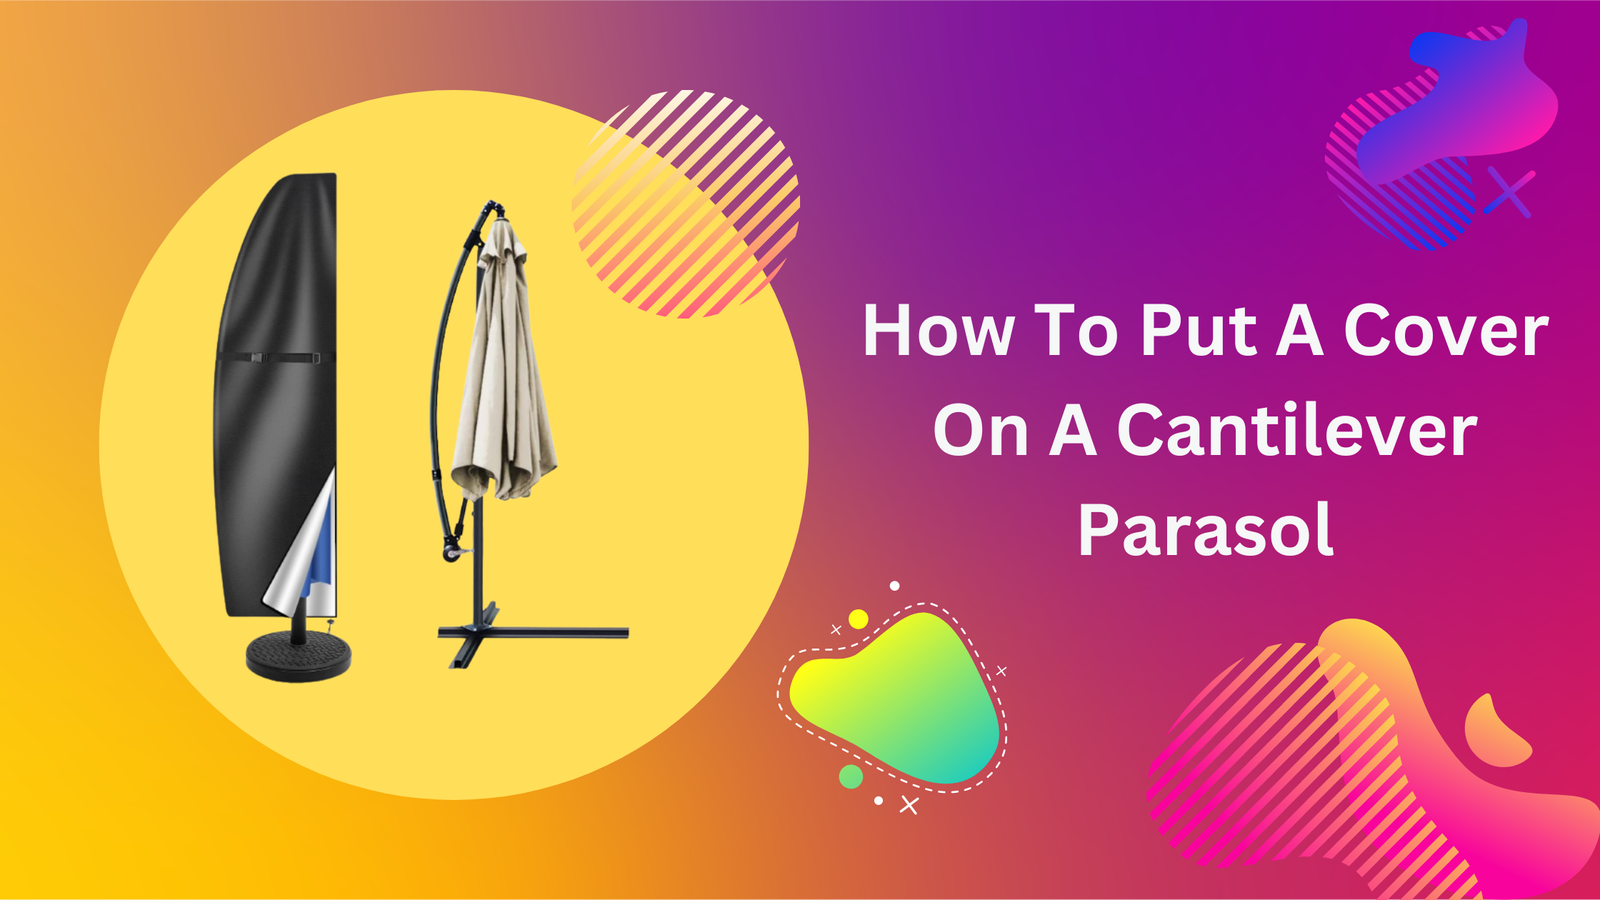 How To Put A Cover On A Cantilever Parasol